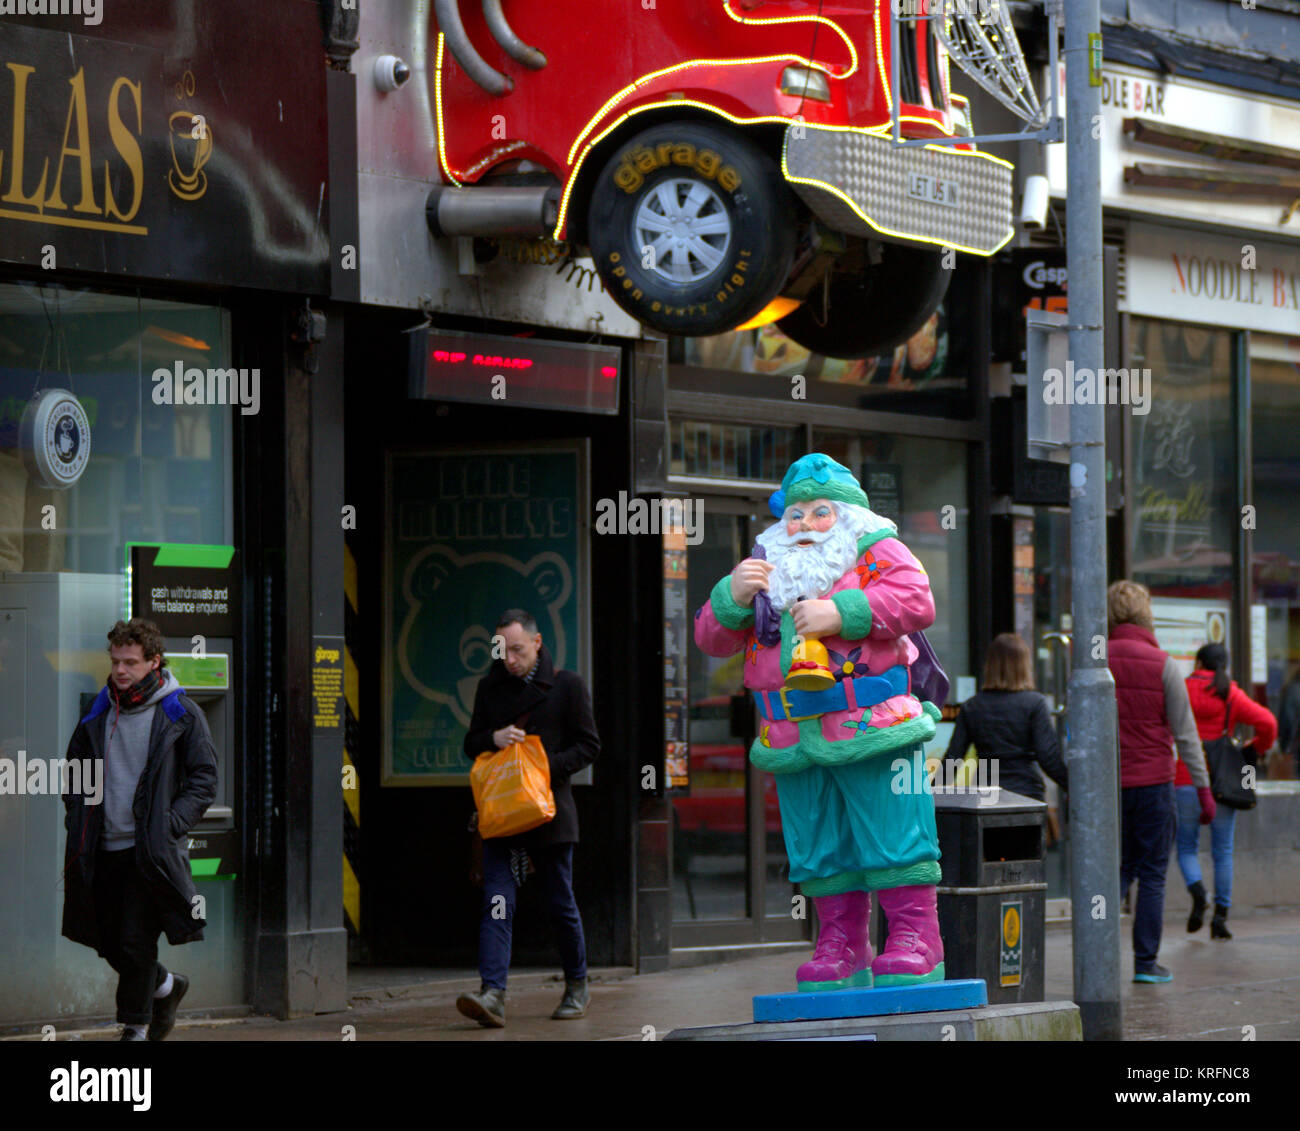 Glasgow, Scotland, UK 20th December. Santas on Sauchiehall Street six-foot statues have been designed by pupils at Garnetbank Primary School to support Business Improvement District (BID) work. Credit: gerard ferry/Alamy Live News Stock Photo